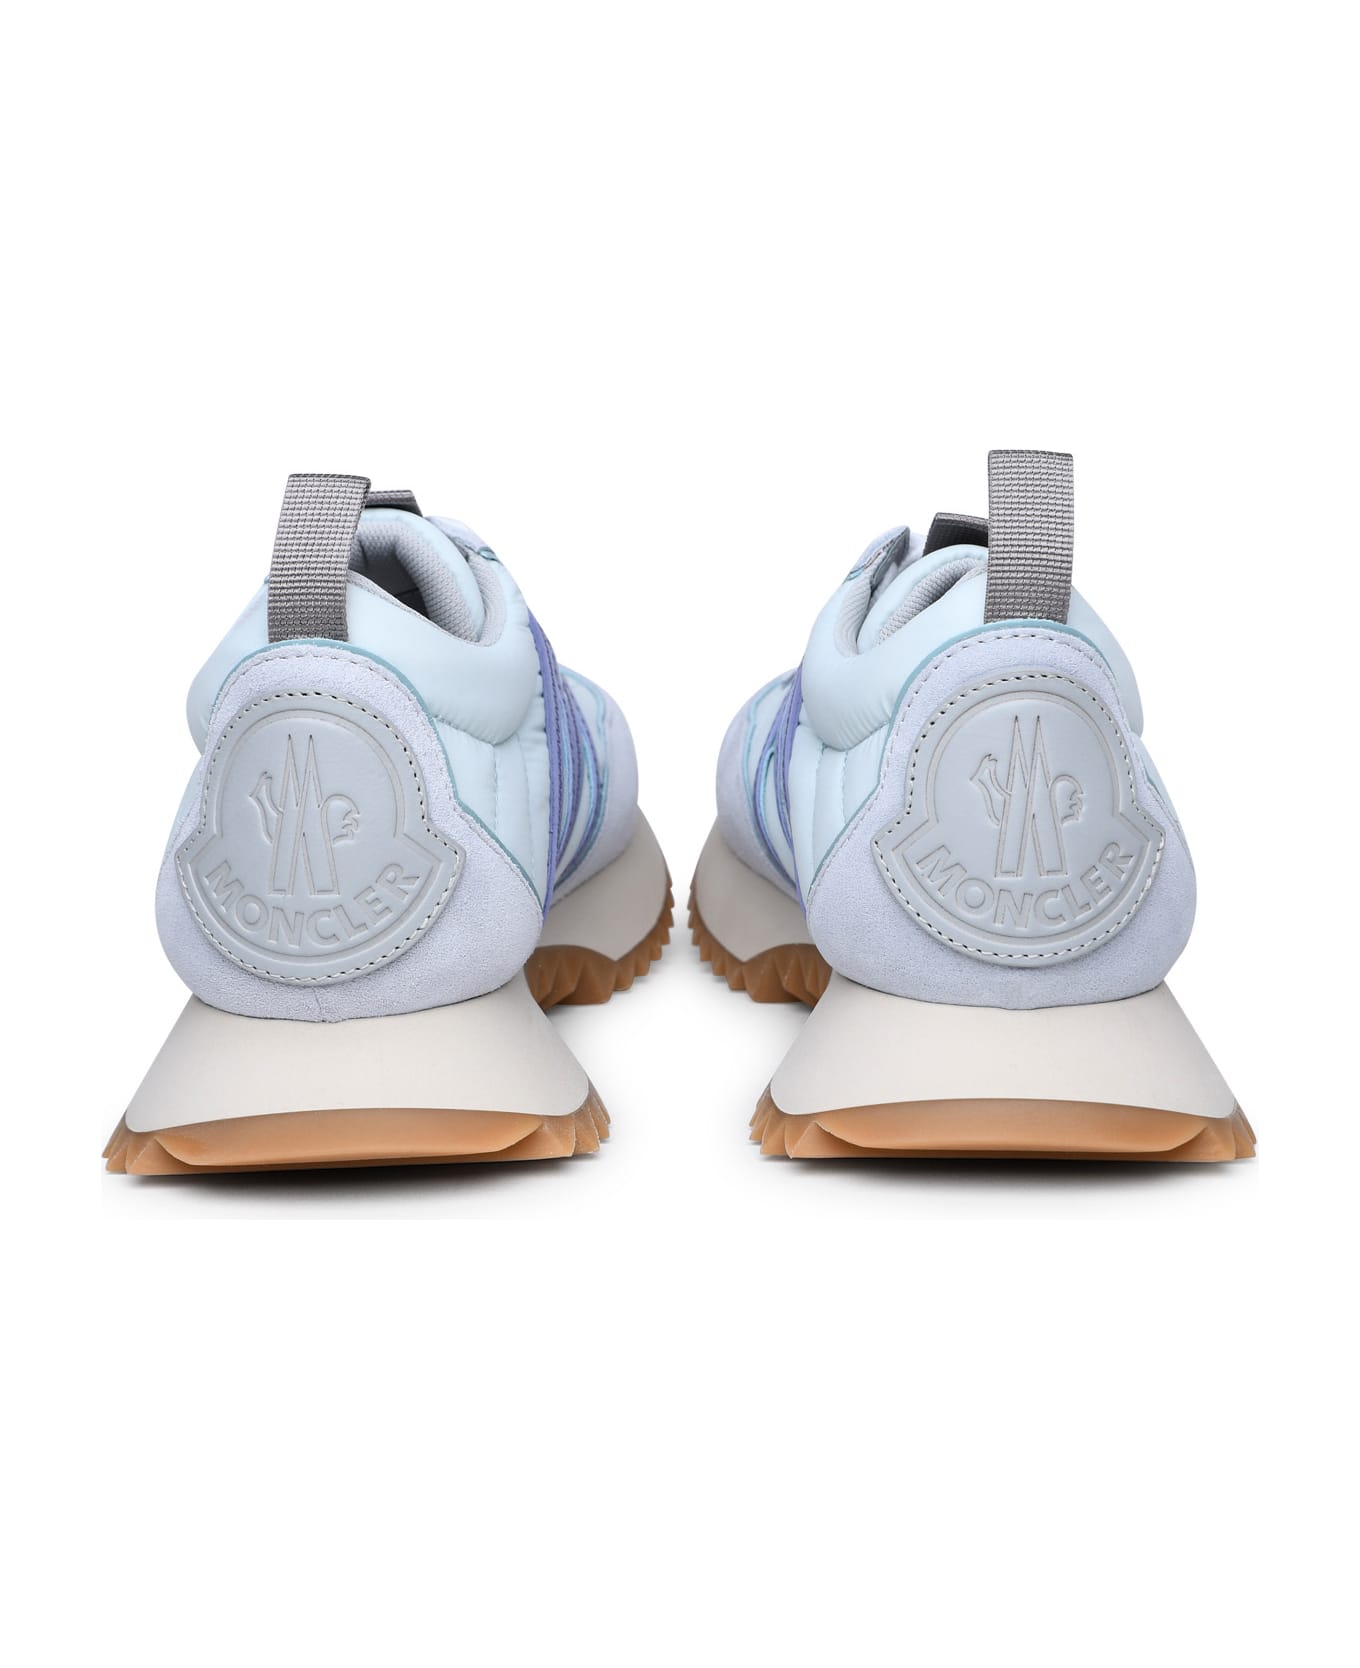 Moncler 'pacey' Sneakers In Light Blue Polyamide - Light Blue スニーカー